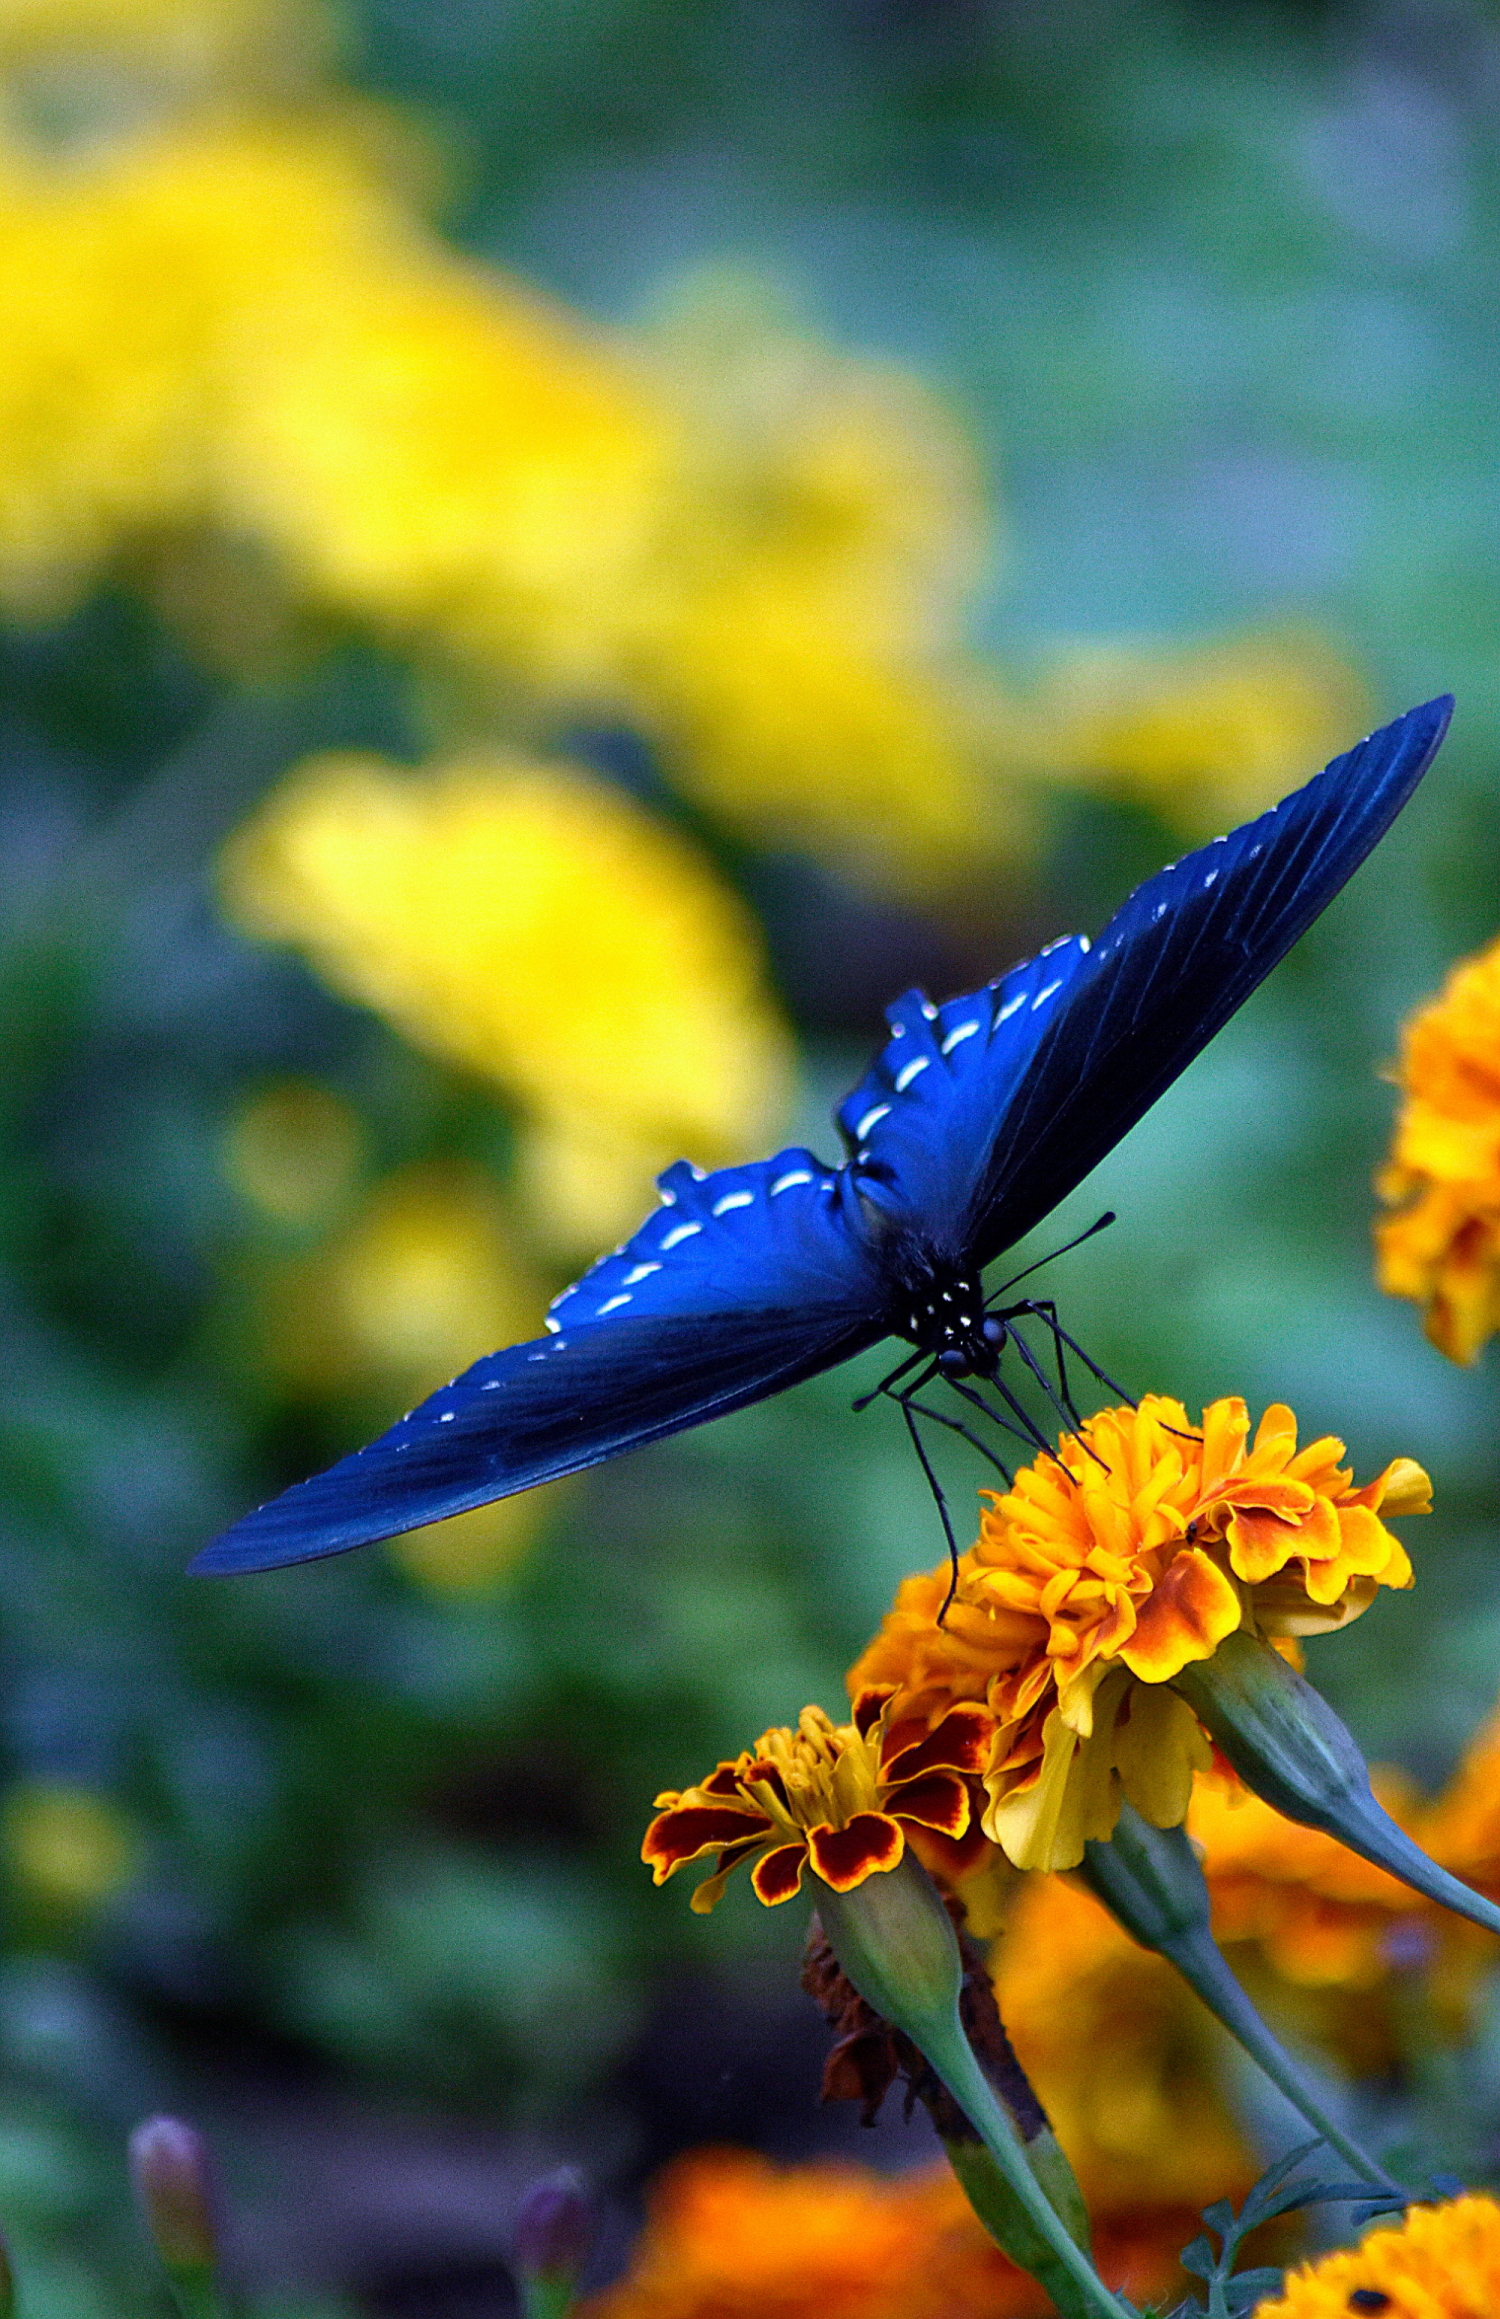 A blue swallowtail on marigolds.